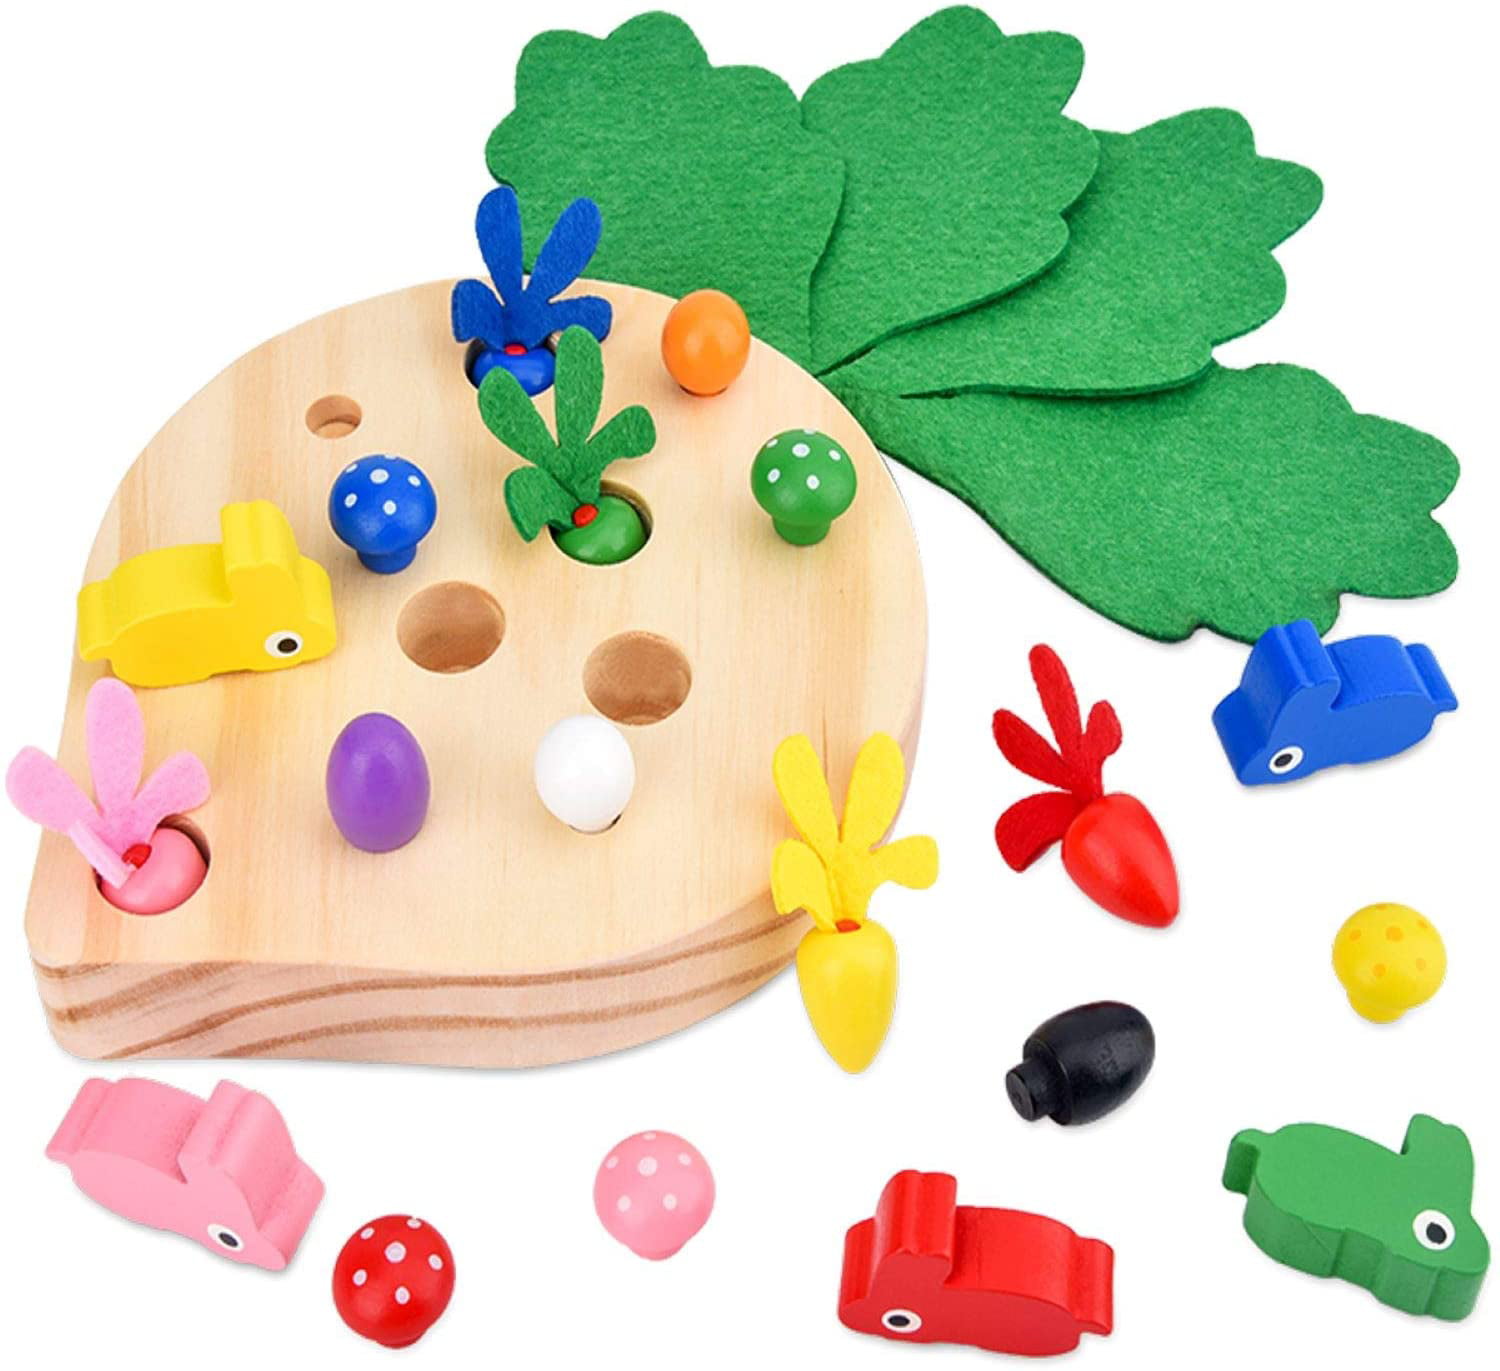 Wooden Pull Along RabbitToy For Baby Boy & Girl Early Educational Toy 